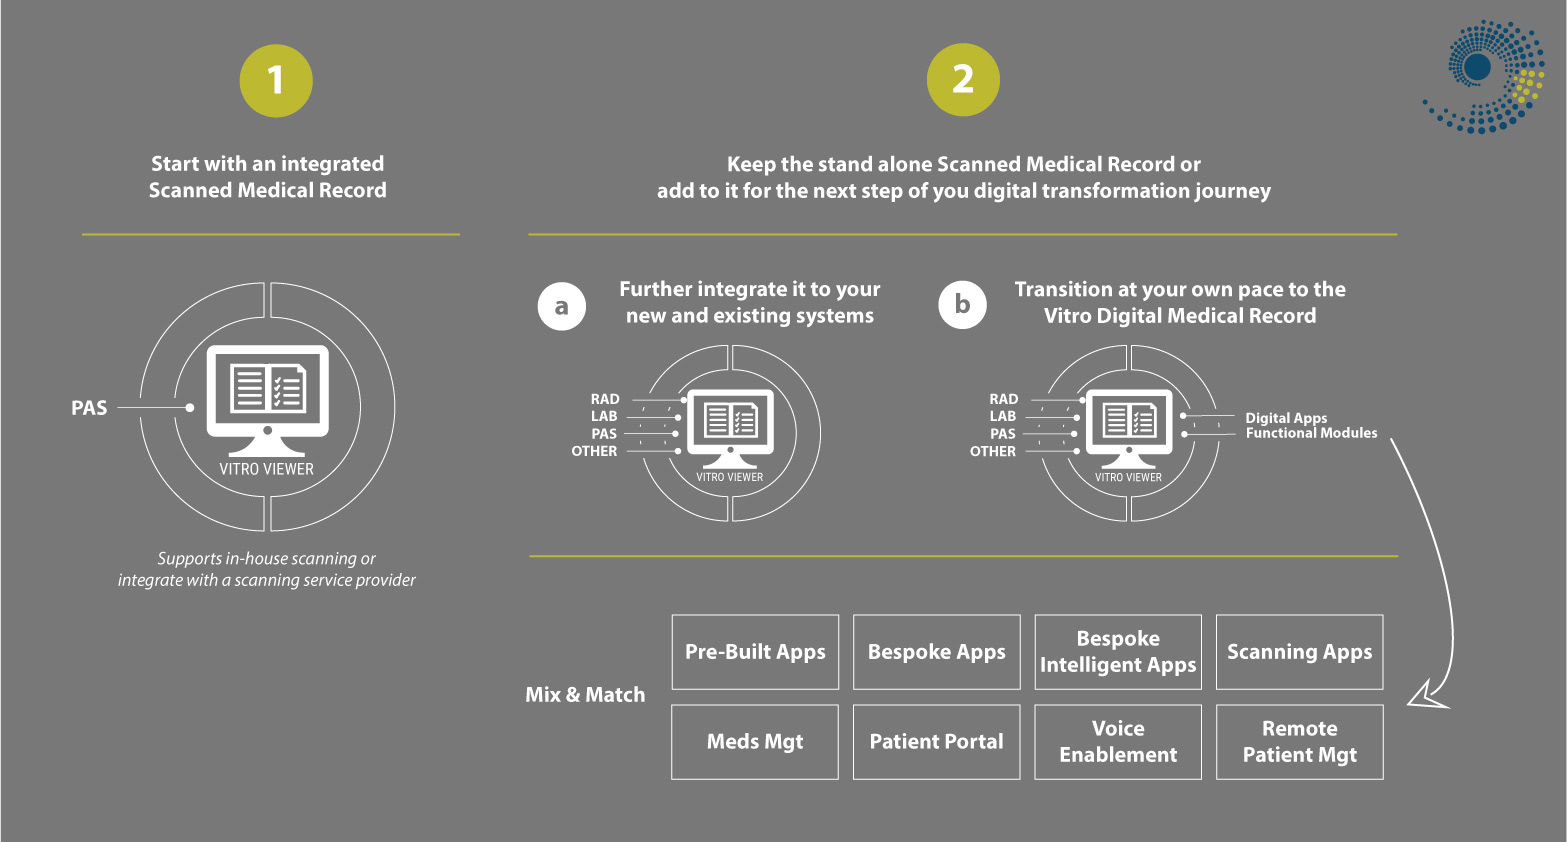 Start with a Scanned Medical Record and easily move to a Digital Medical Record